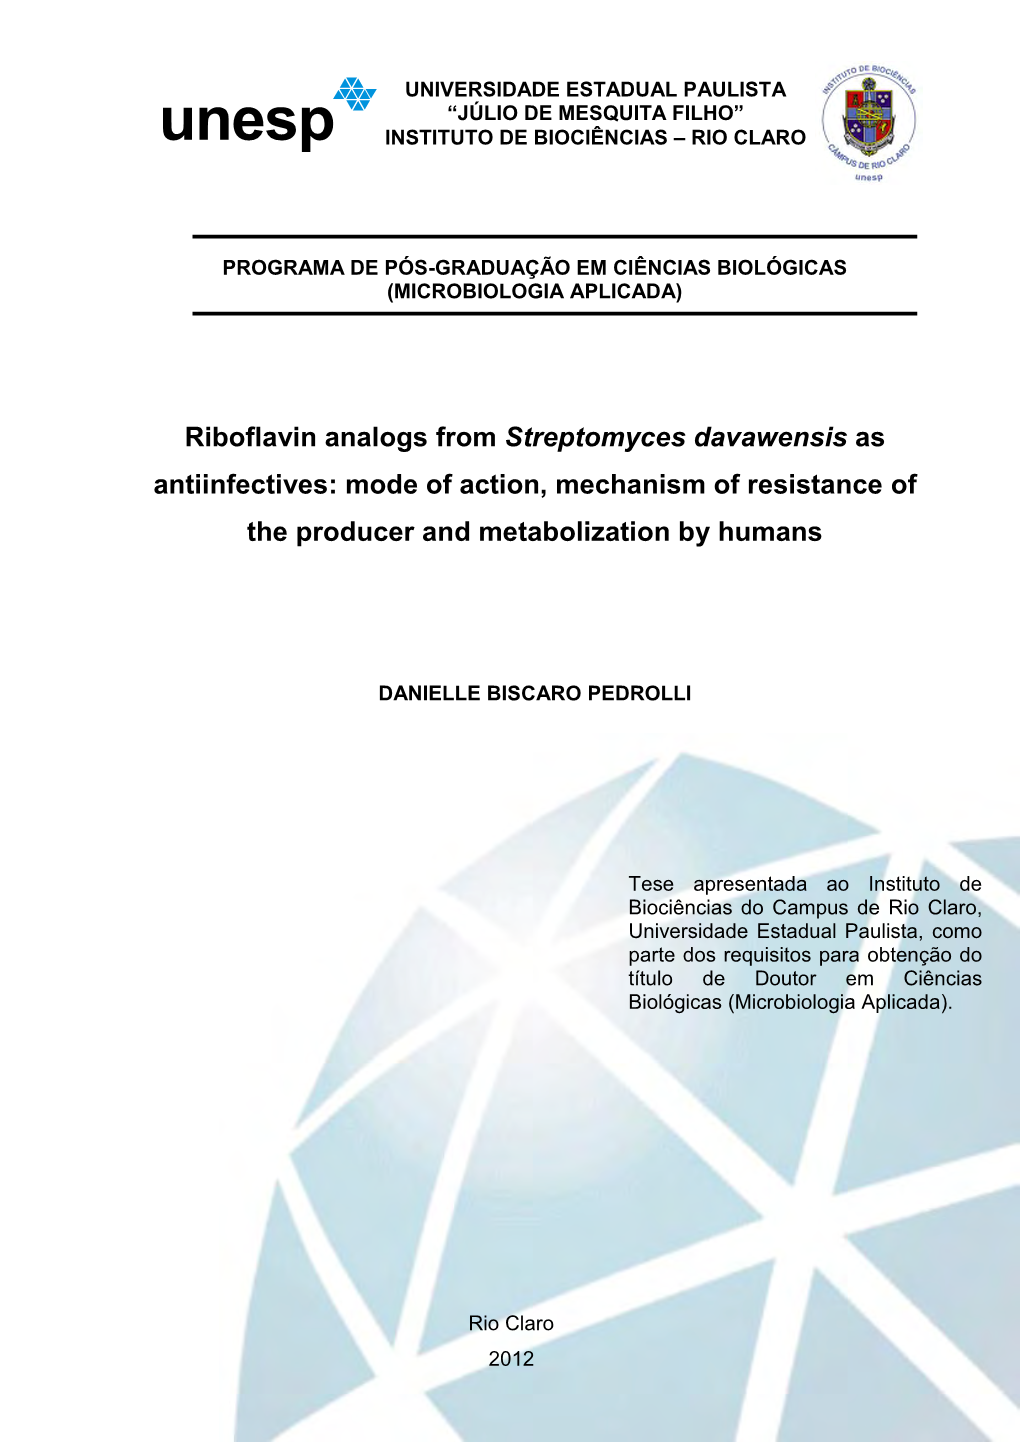 Riboflavin Analogs from Streptomyces Davawensis As Antiinfectives: Mode of Action, Mechanism of Resistance of the Producer and Metabolization by Humans